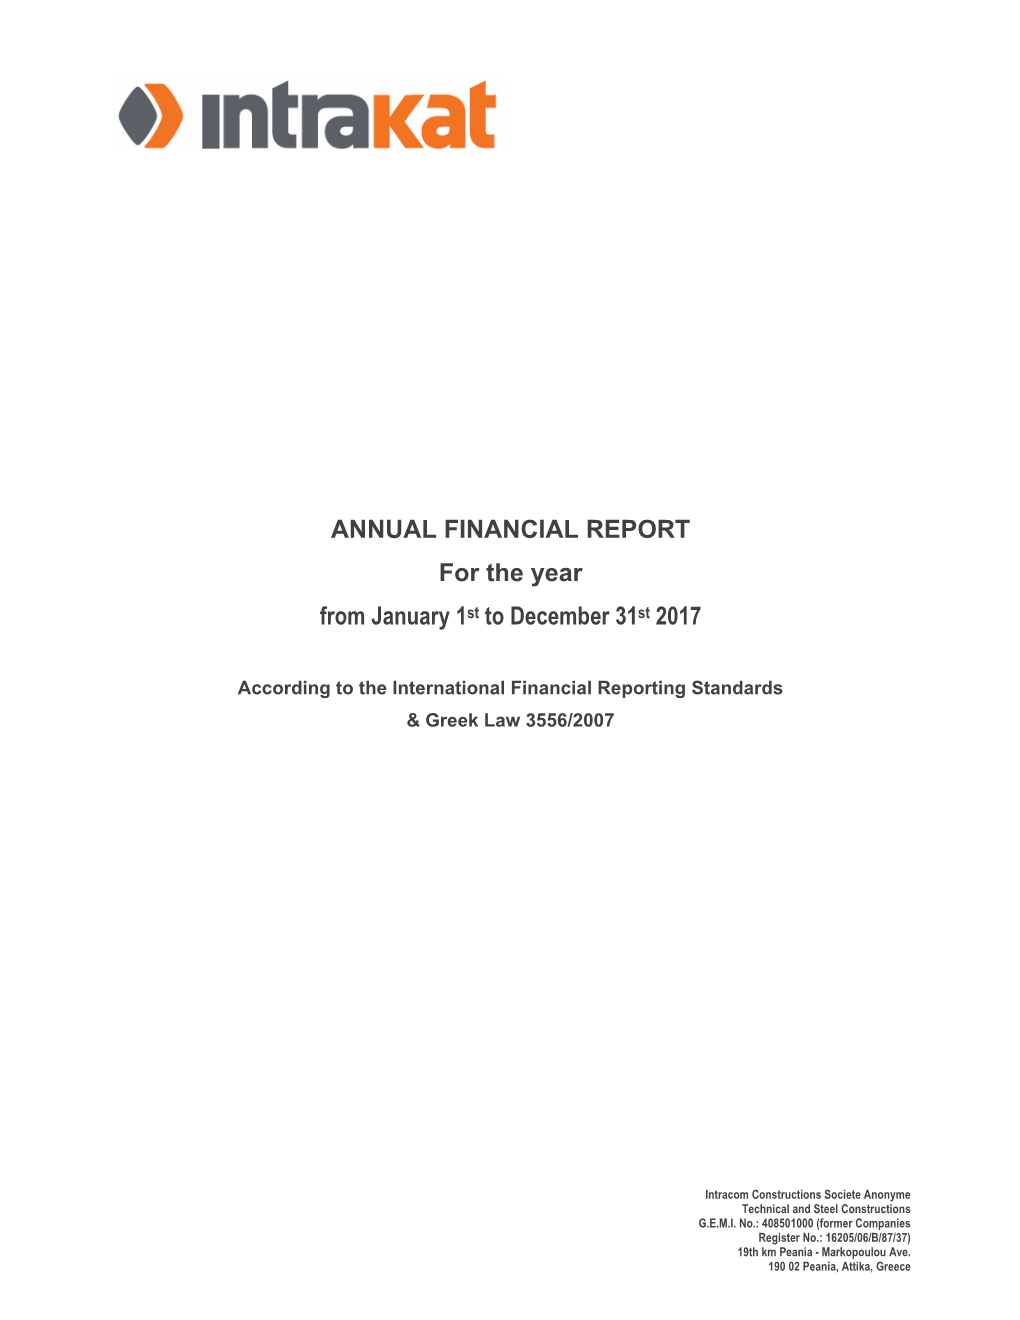 ANNUAL FINANCIAL REPORT for the Year from January 1St to December 31St 2017